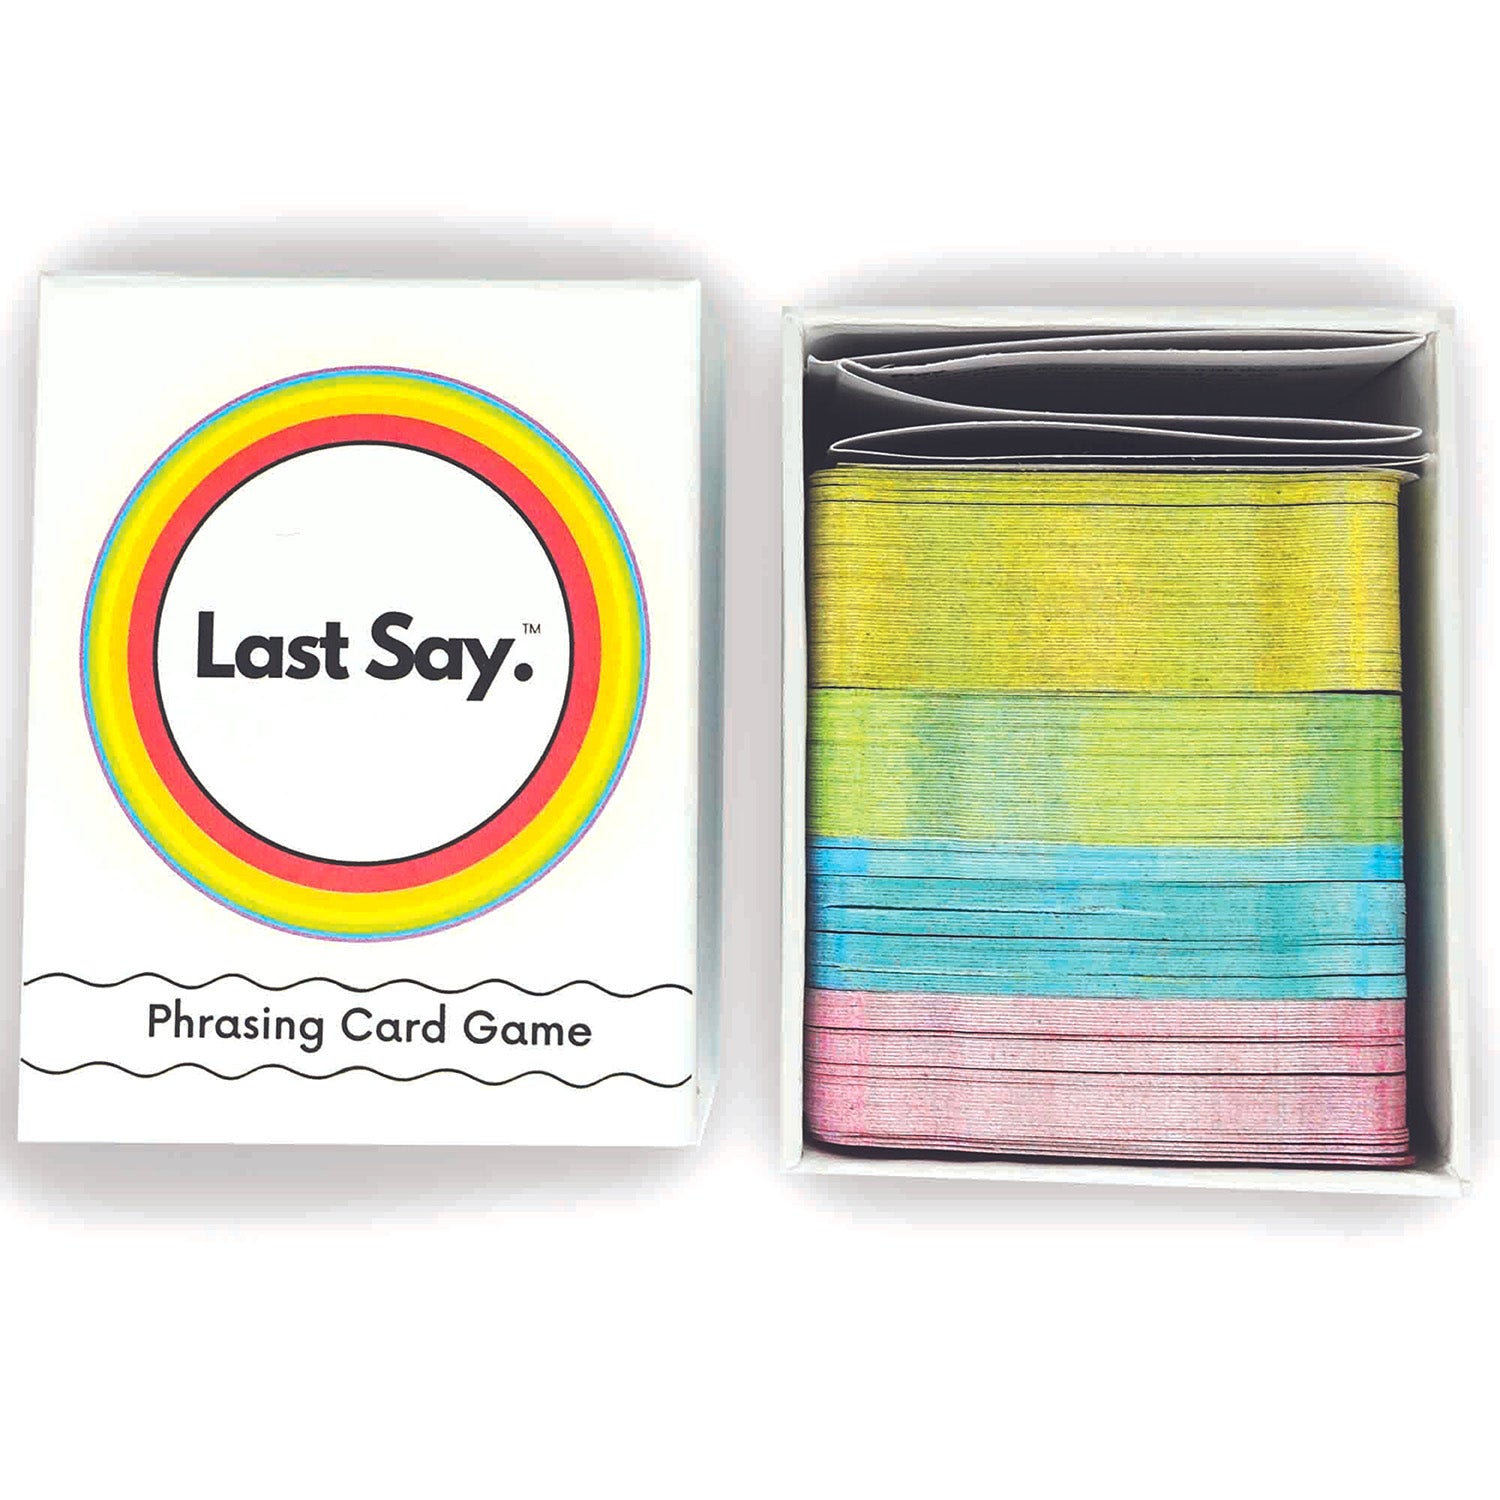 Last Say Card Game, The Ultimate Phrasing Card Game